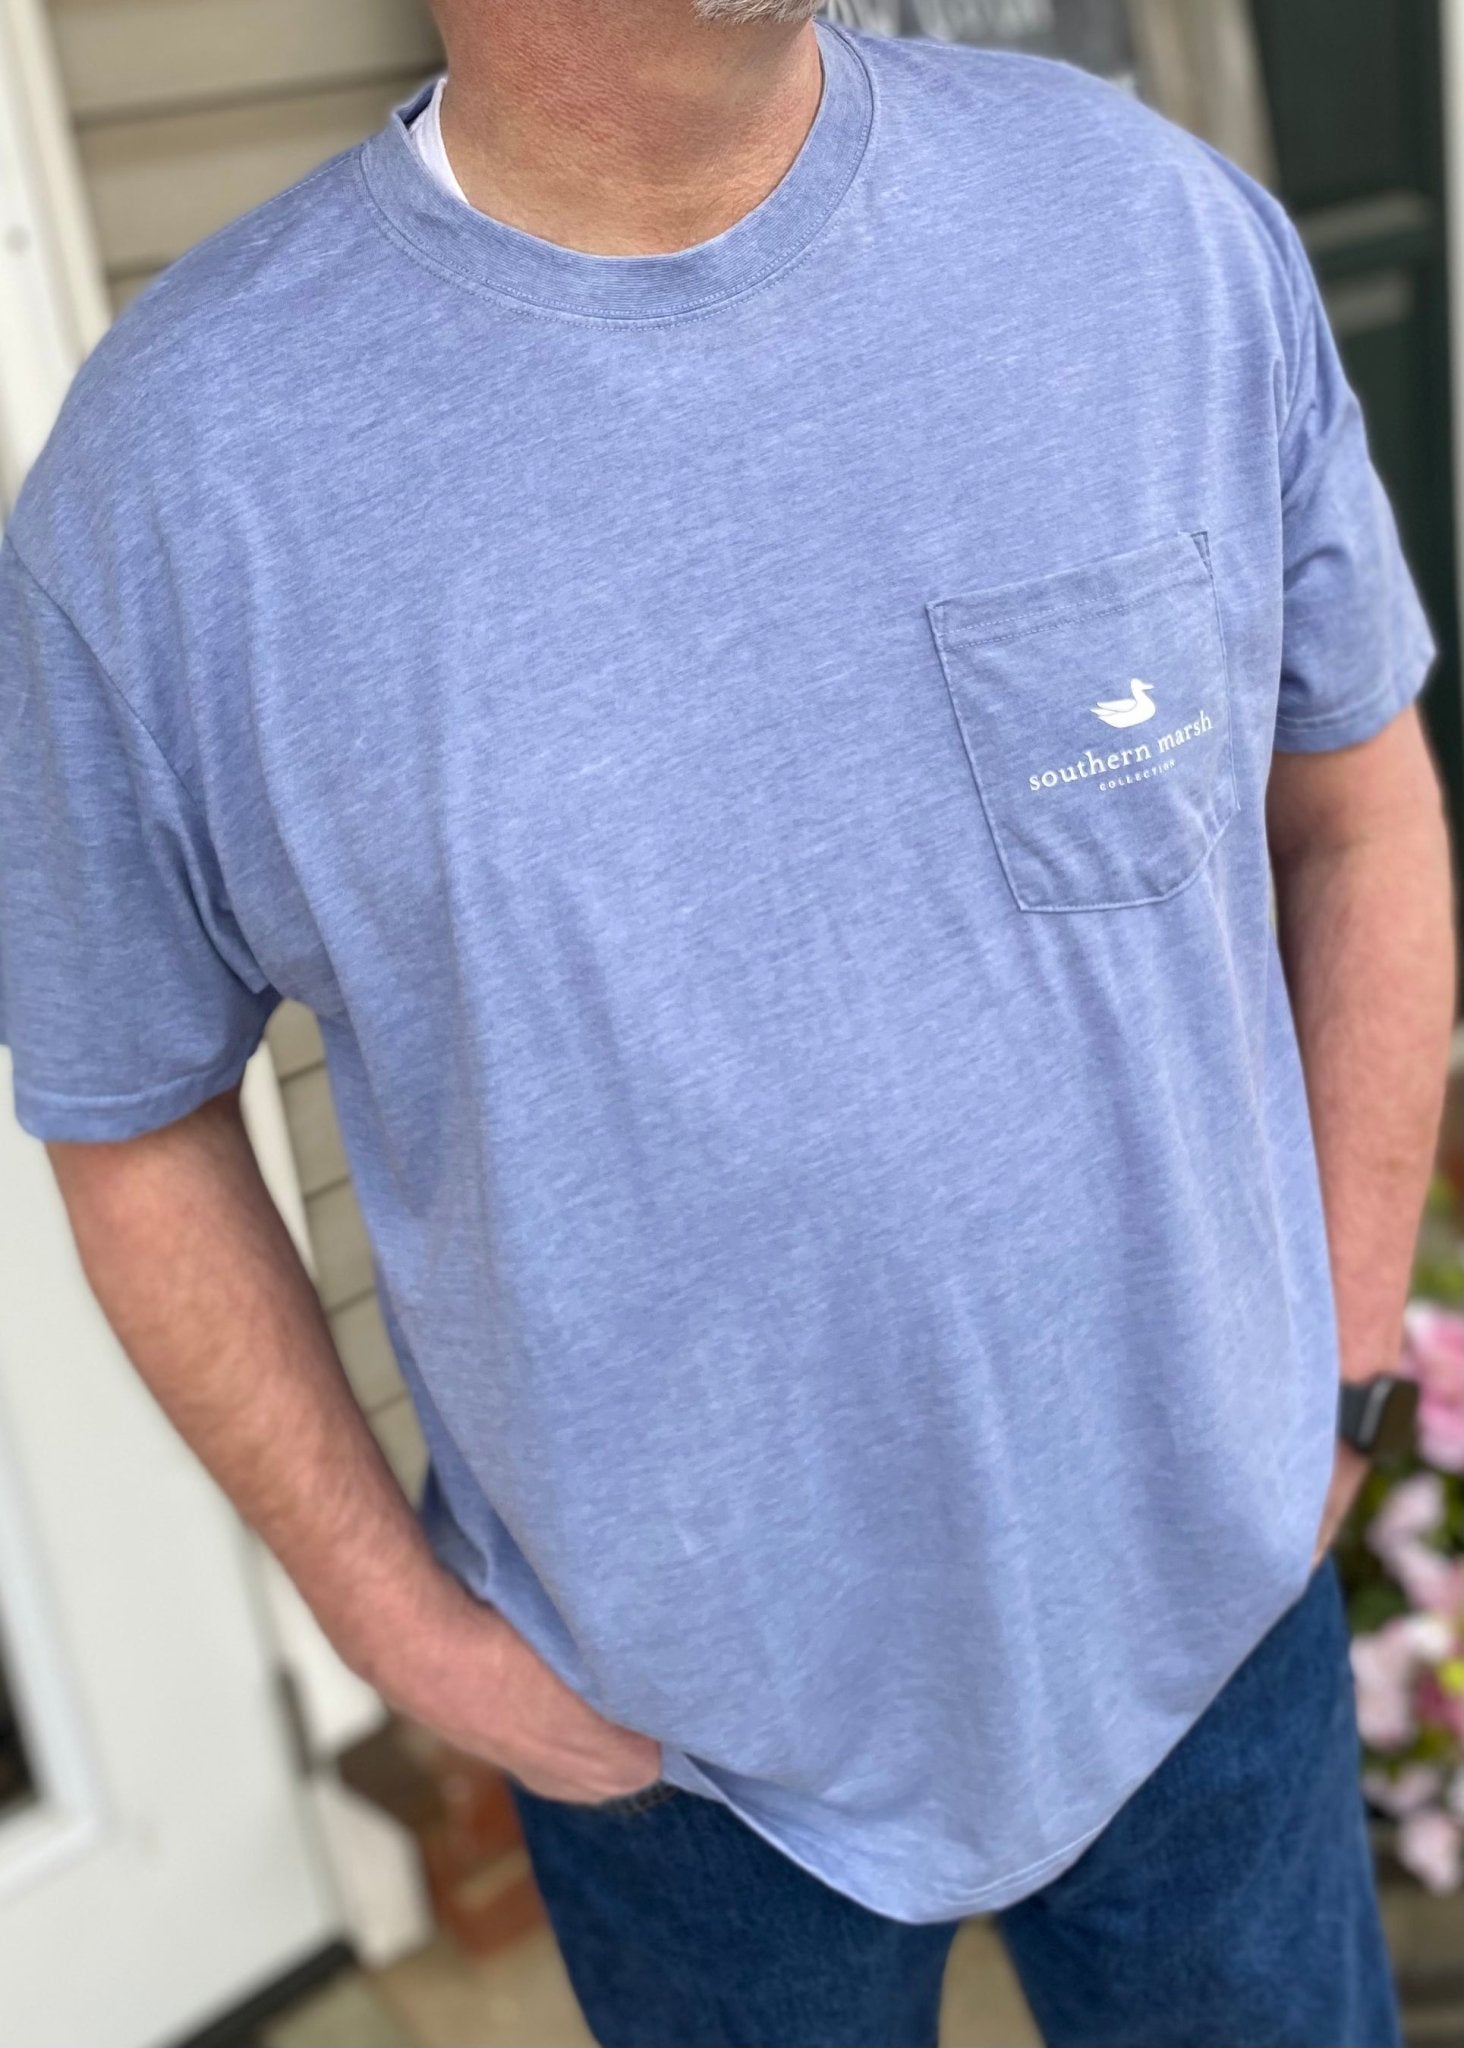 Southern Marsh Seawash Tee - Mercantile Co - Washed Blue - Southern Marsh Graphic Tee -Jimberly's Boutique-Olive Branch-Mississippi